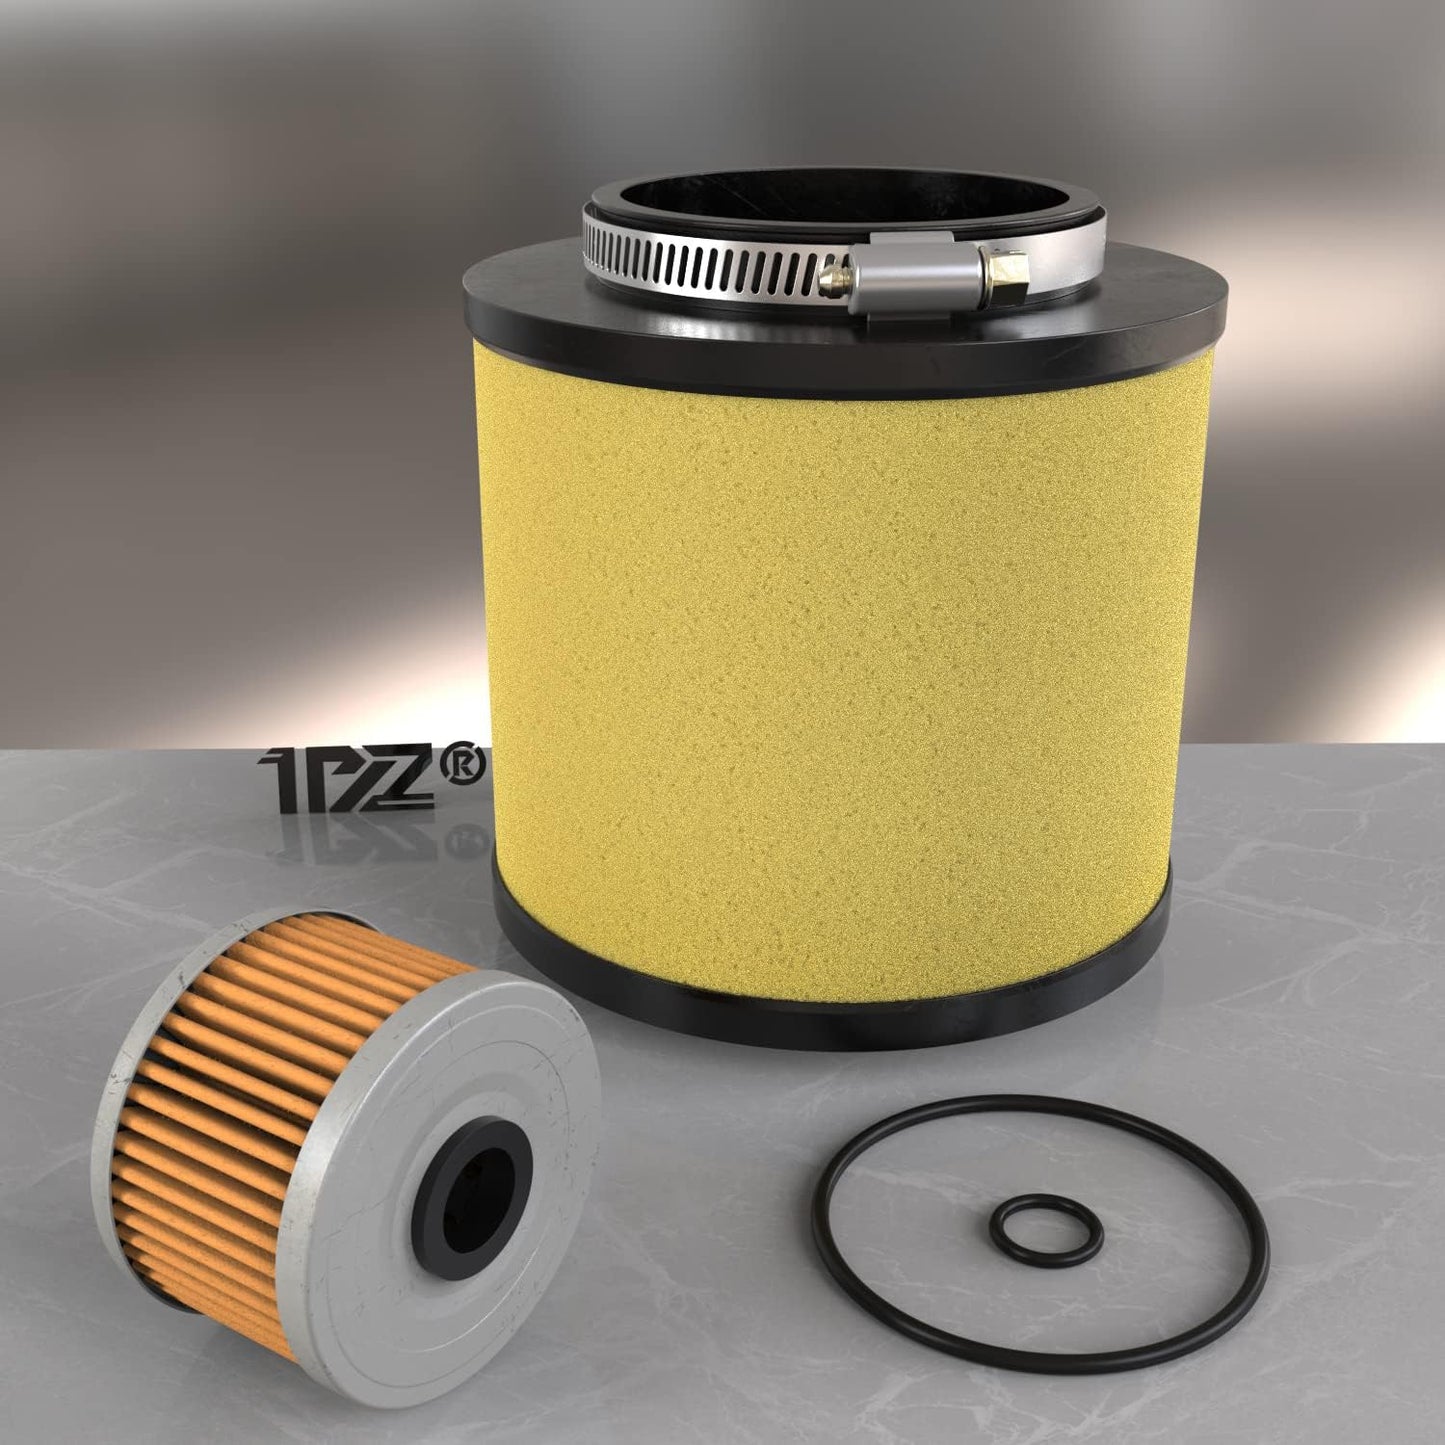 1PZ AO1-F02 Oil Air Cleaner Filter with O-rings Replacement for Honda TRX300 TRX400 FW 15410-KF0-315 17254-HC5-900 17254-HC5-890 1988-1997